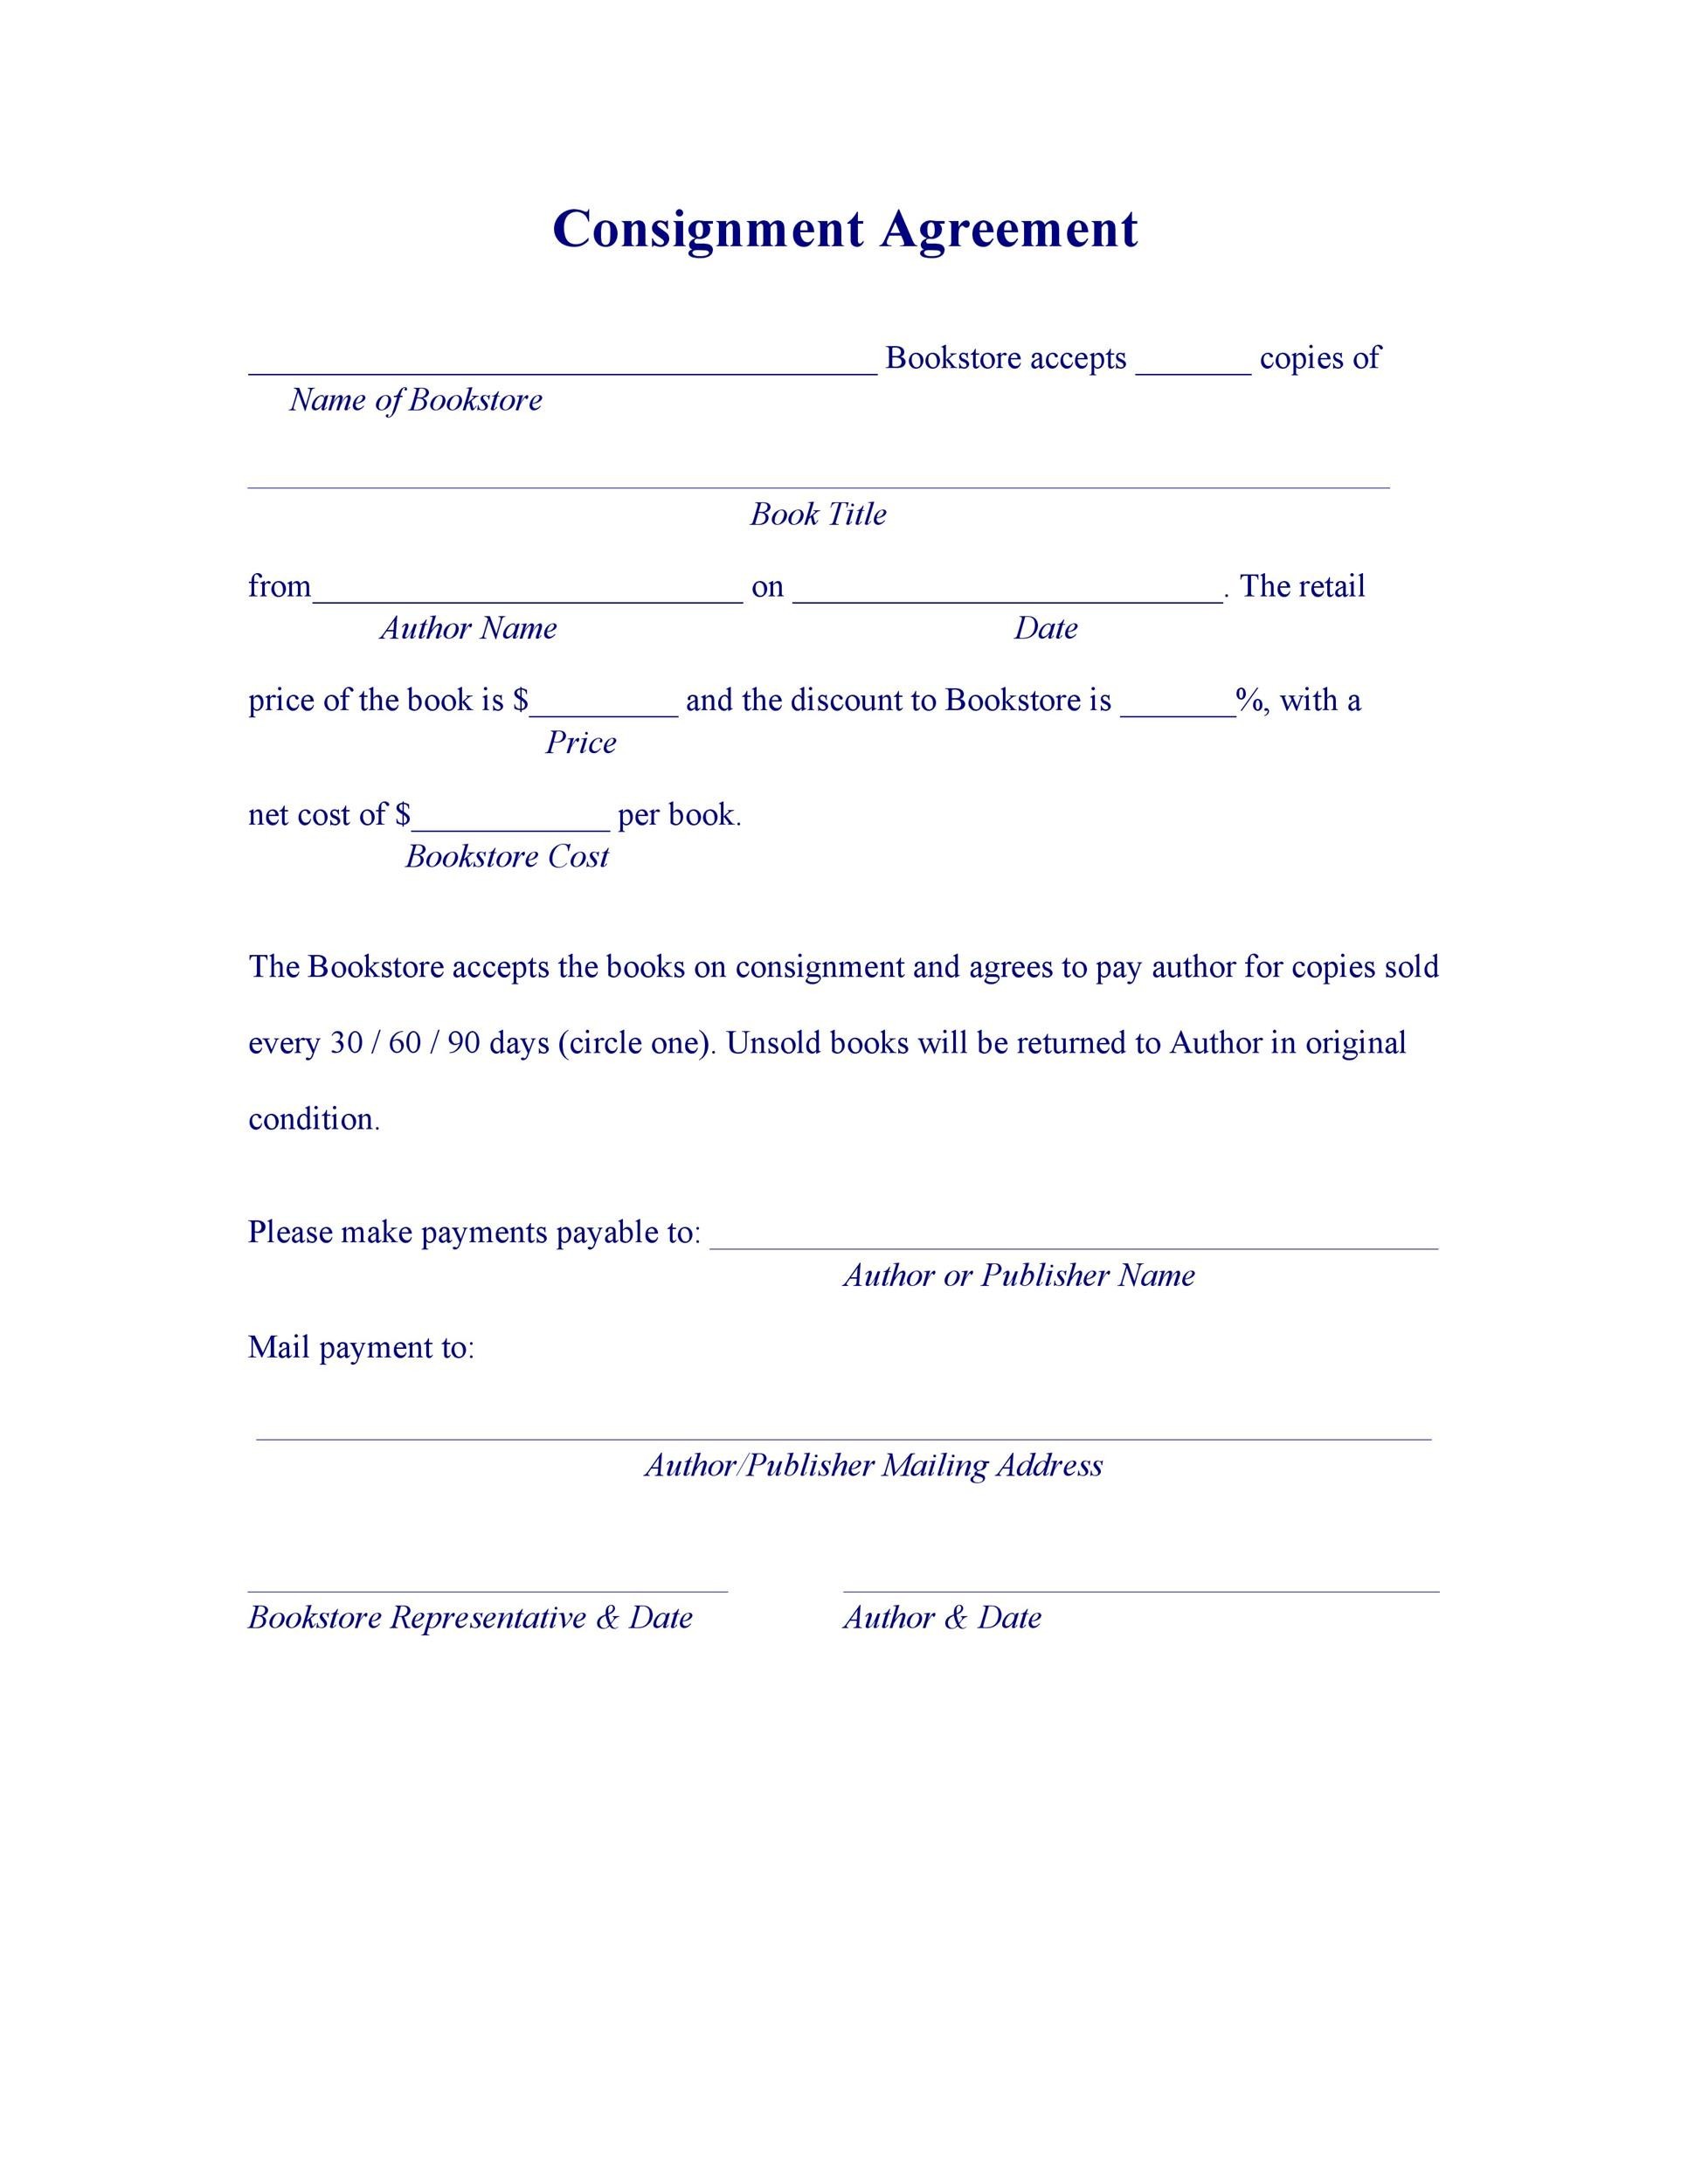 Free Printable Consignment Contract TUTORE ORG Master Of Documents